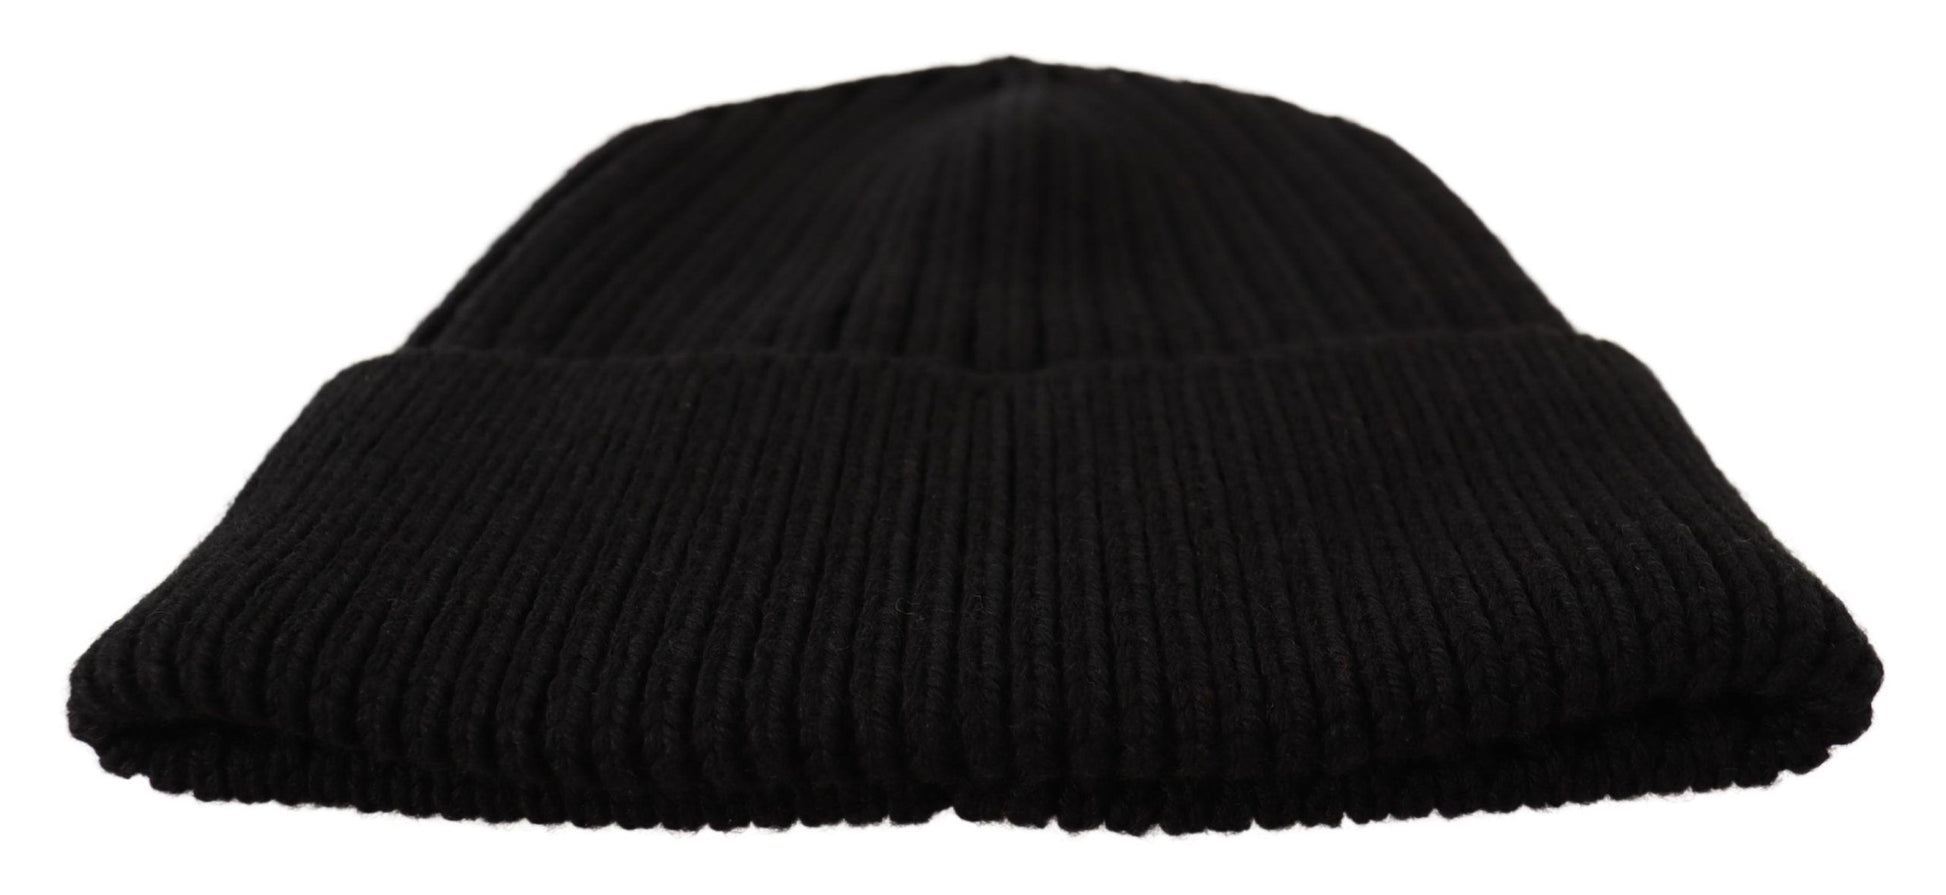 Black Wool Knit Women Winter Hat - Designed by Dolce & Gabbana Available to Buy at a Discounted Price on Moon Behind The Hill Online Designer Discount Store